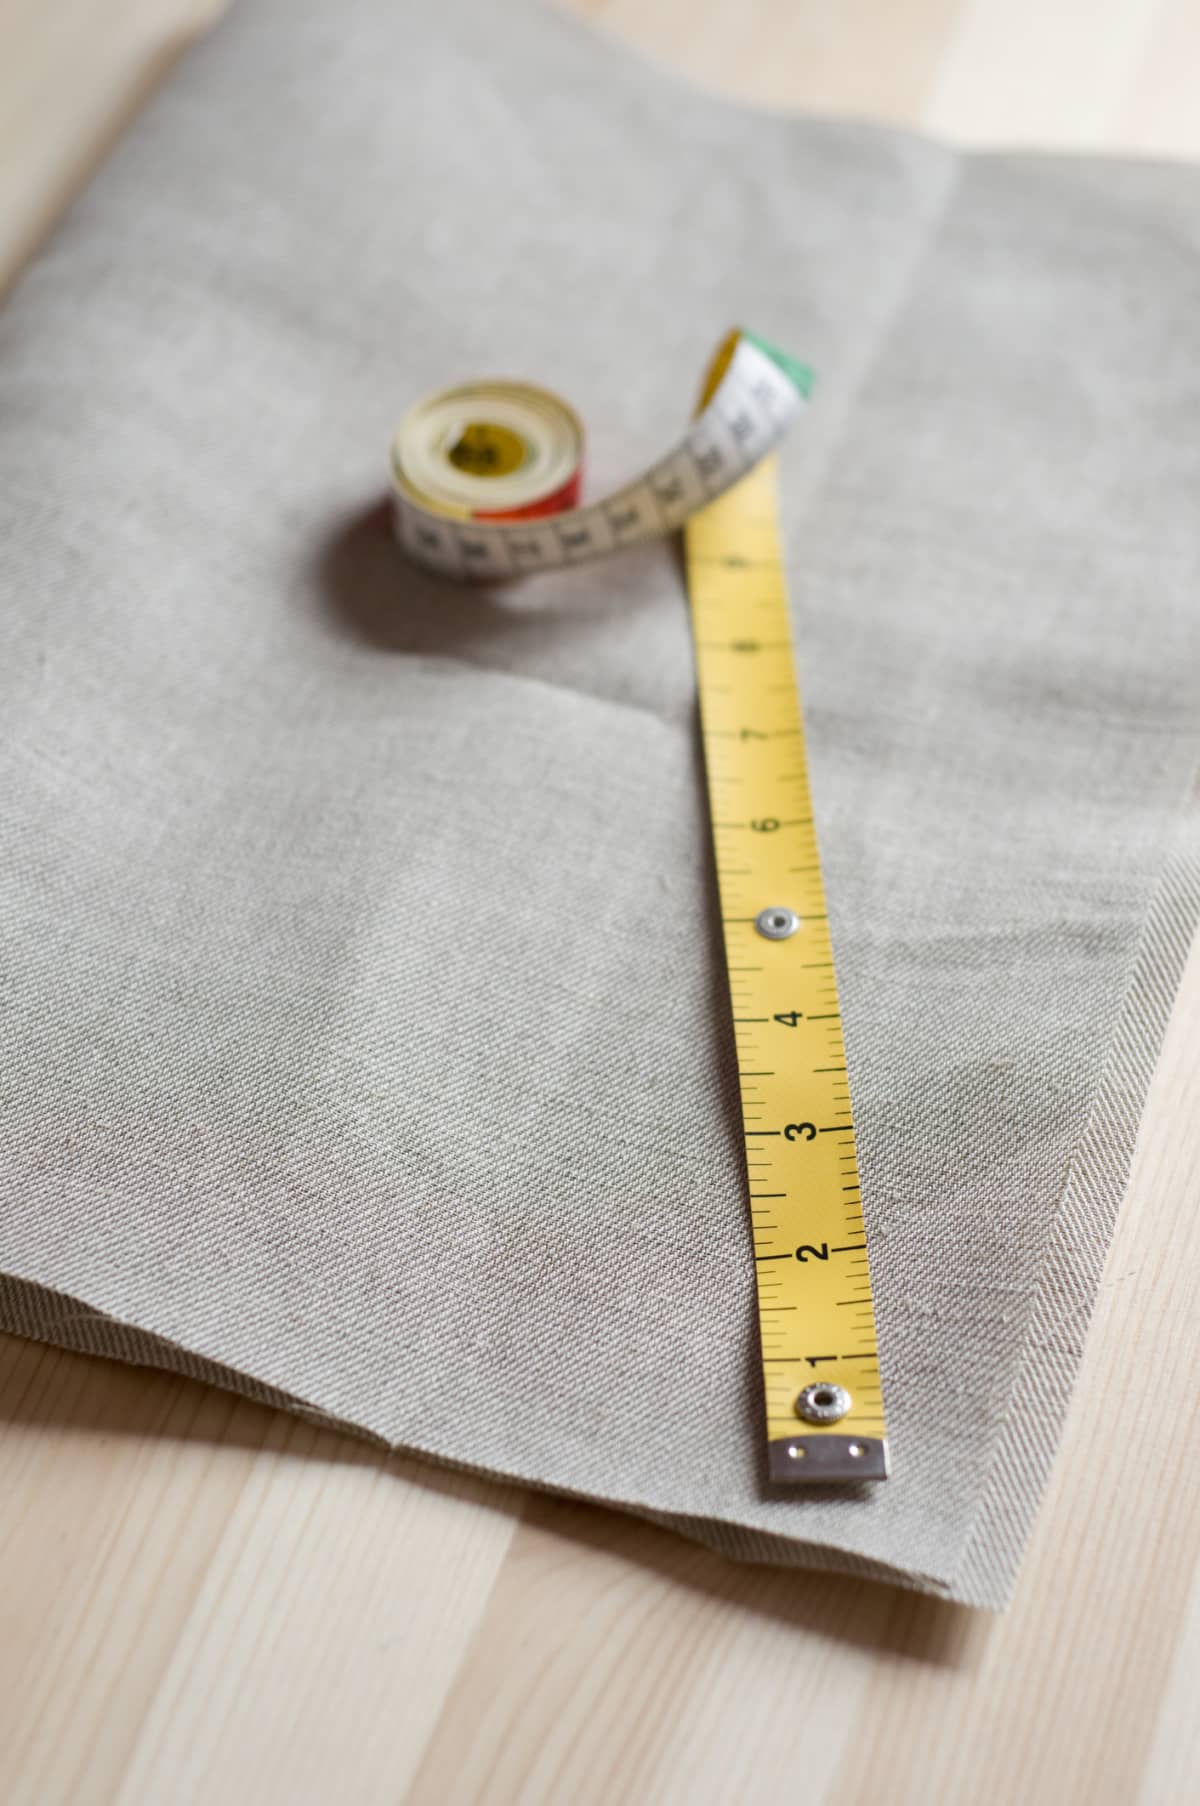 Fabric tape measure on natural colored linen.